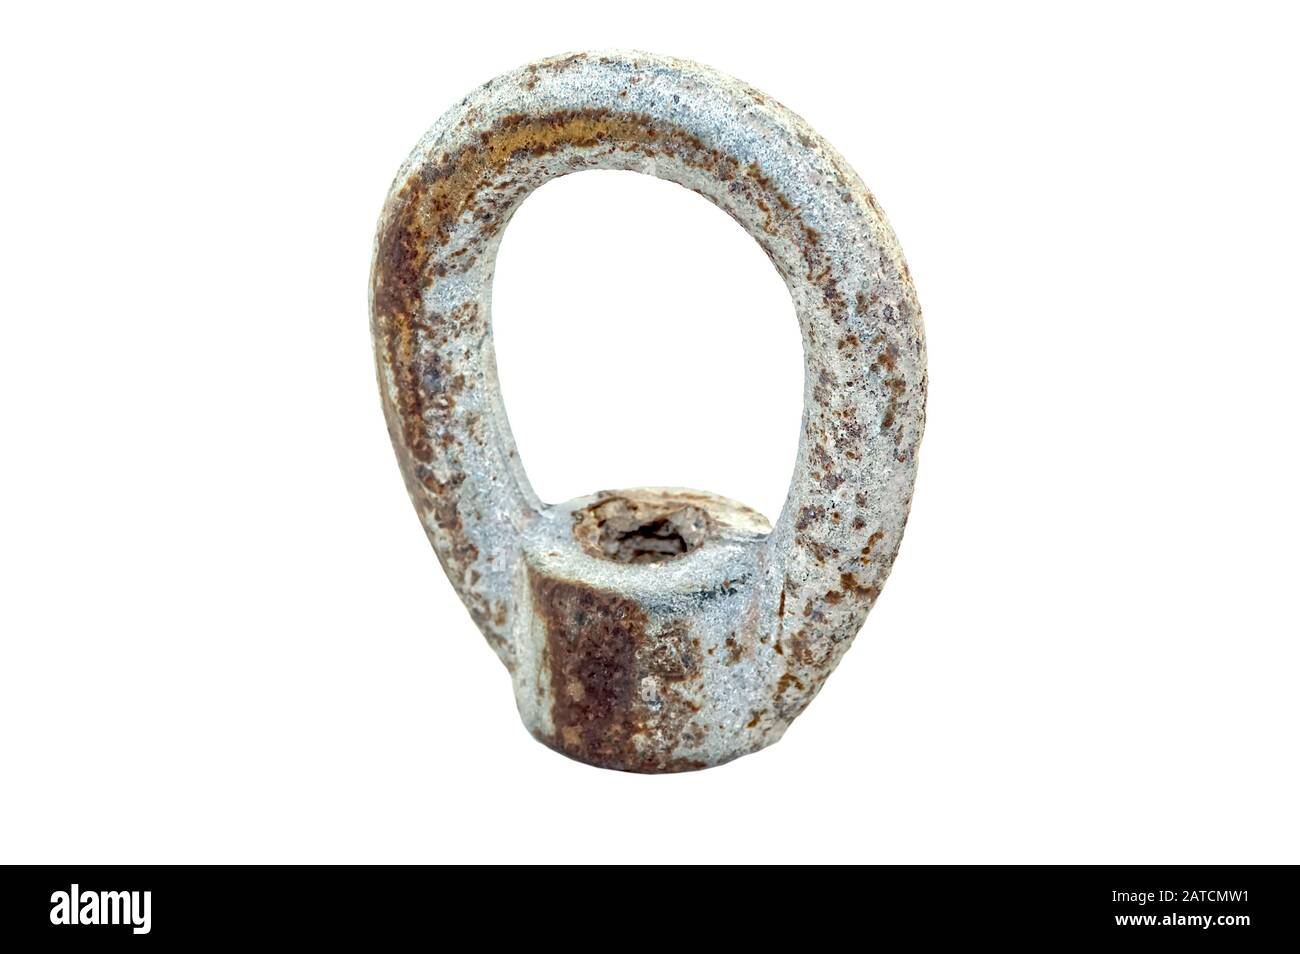 An old rusty metal hook loop photographed on a white background. Stock Photo